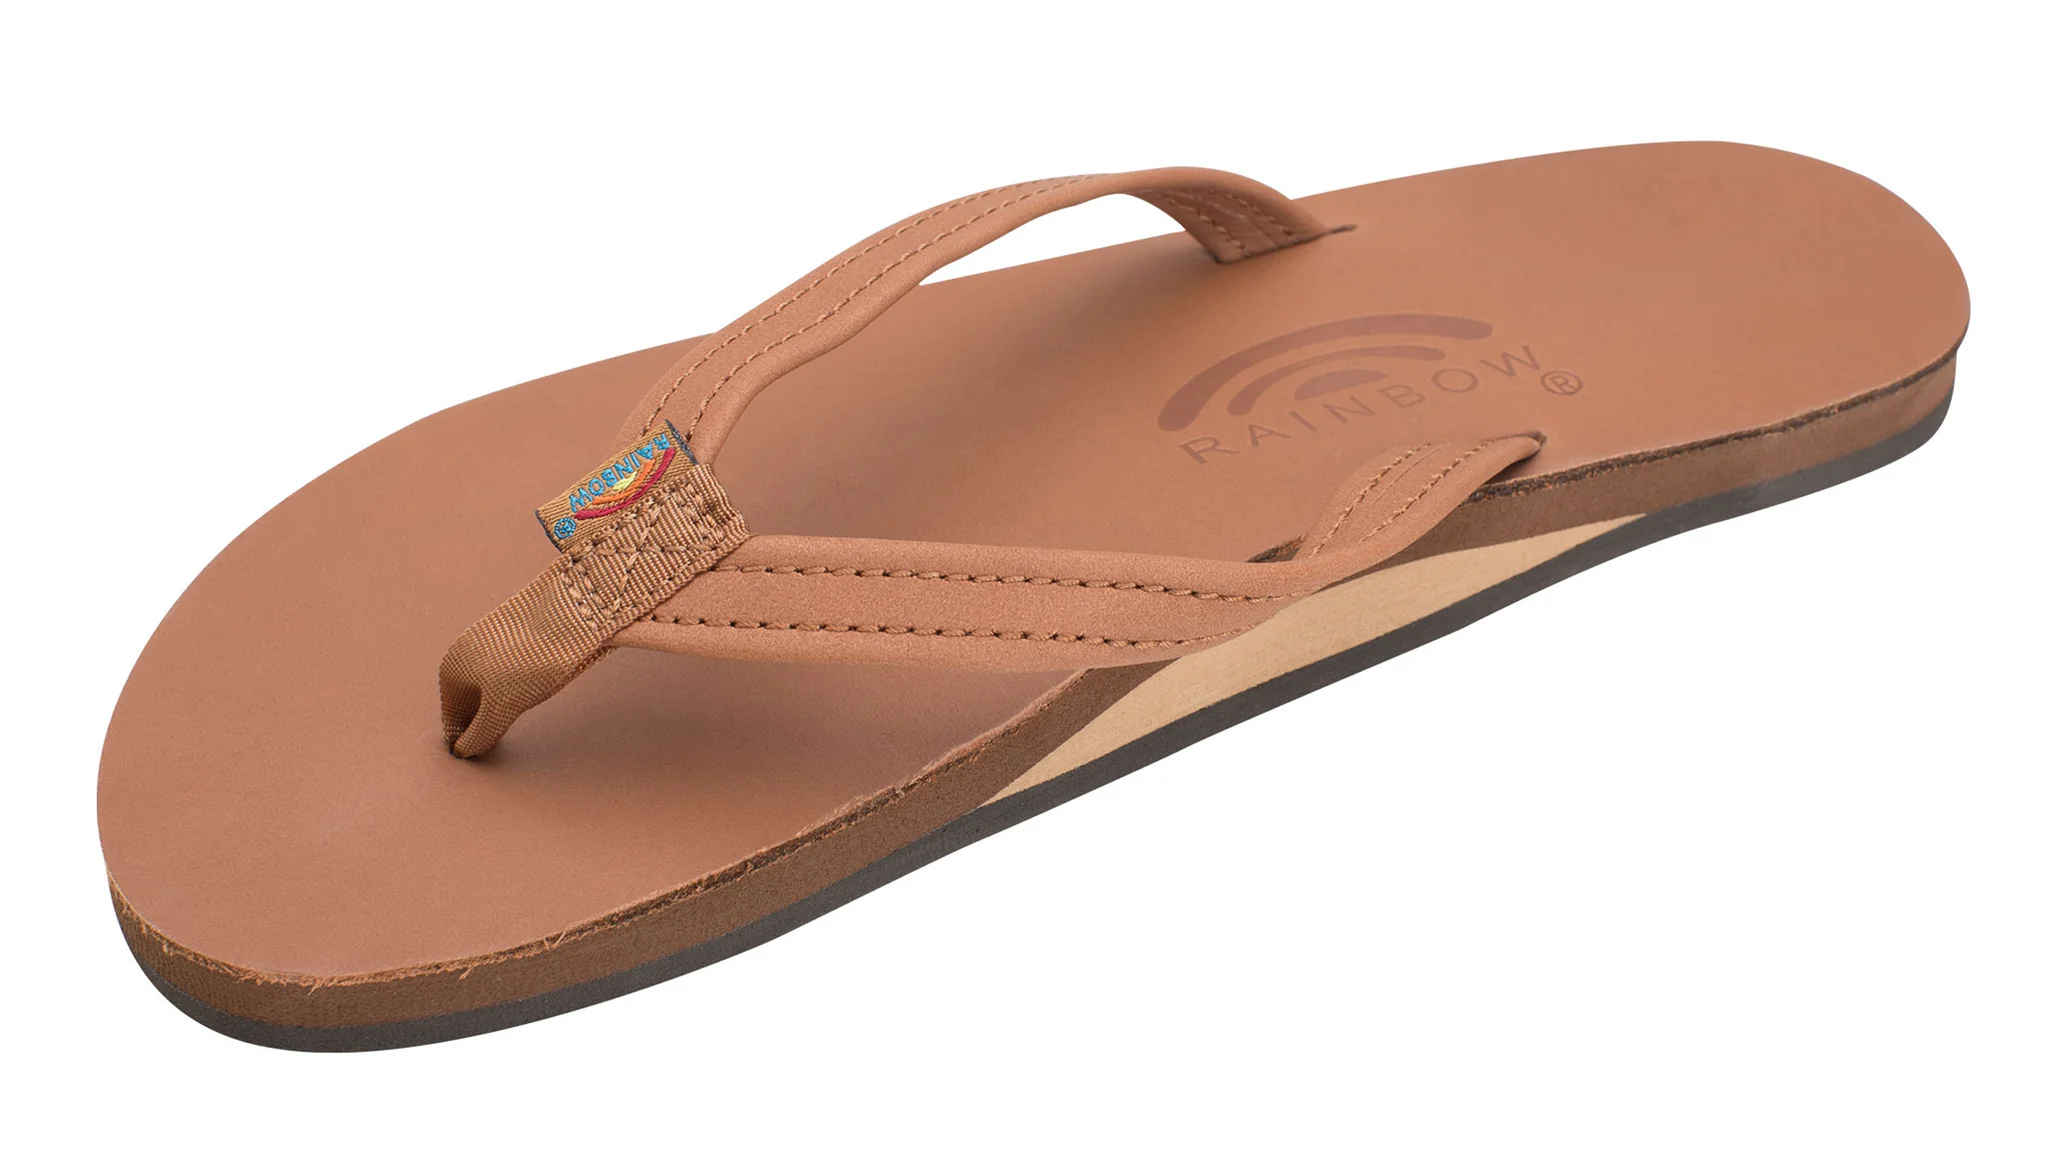 How to Spot Fake Rainbow Sandals